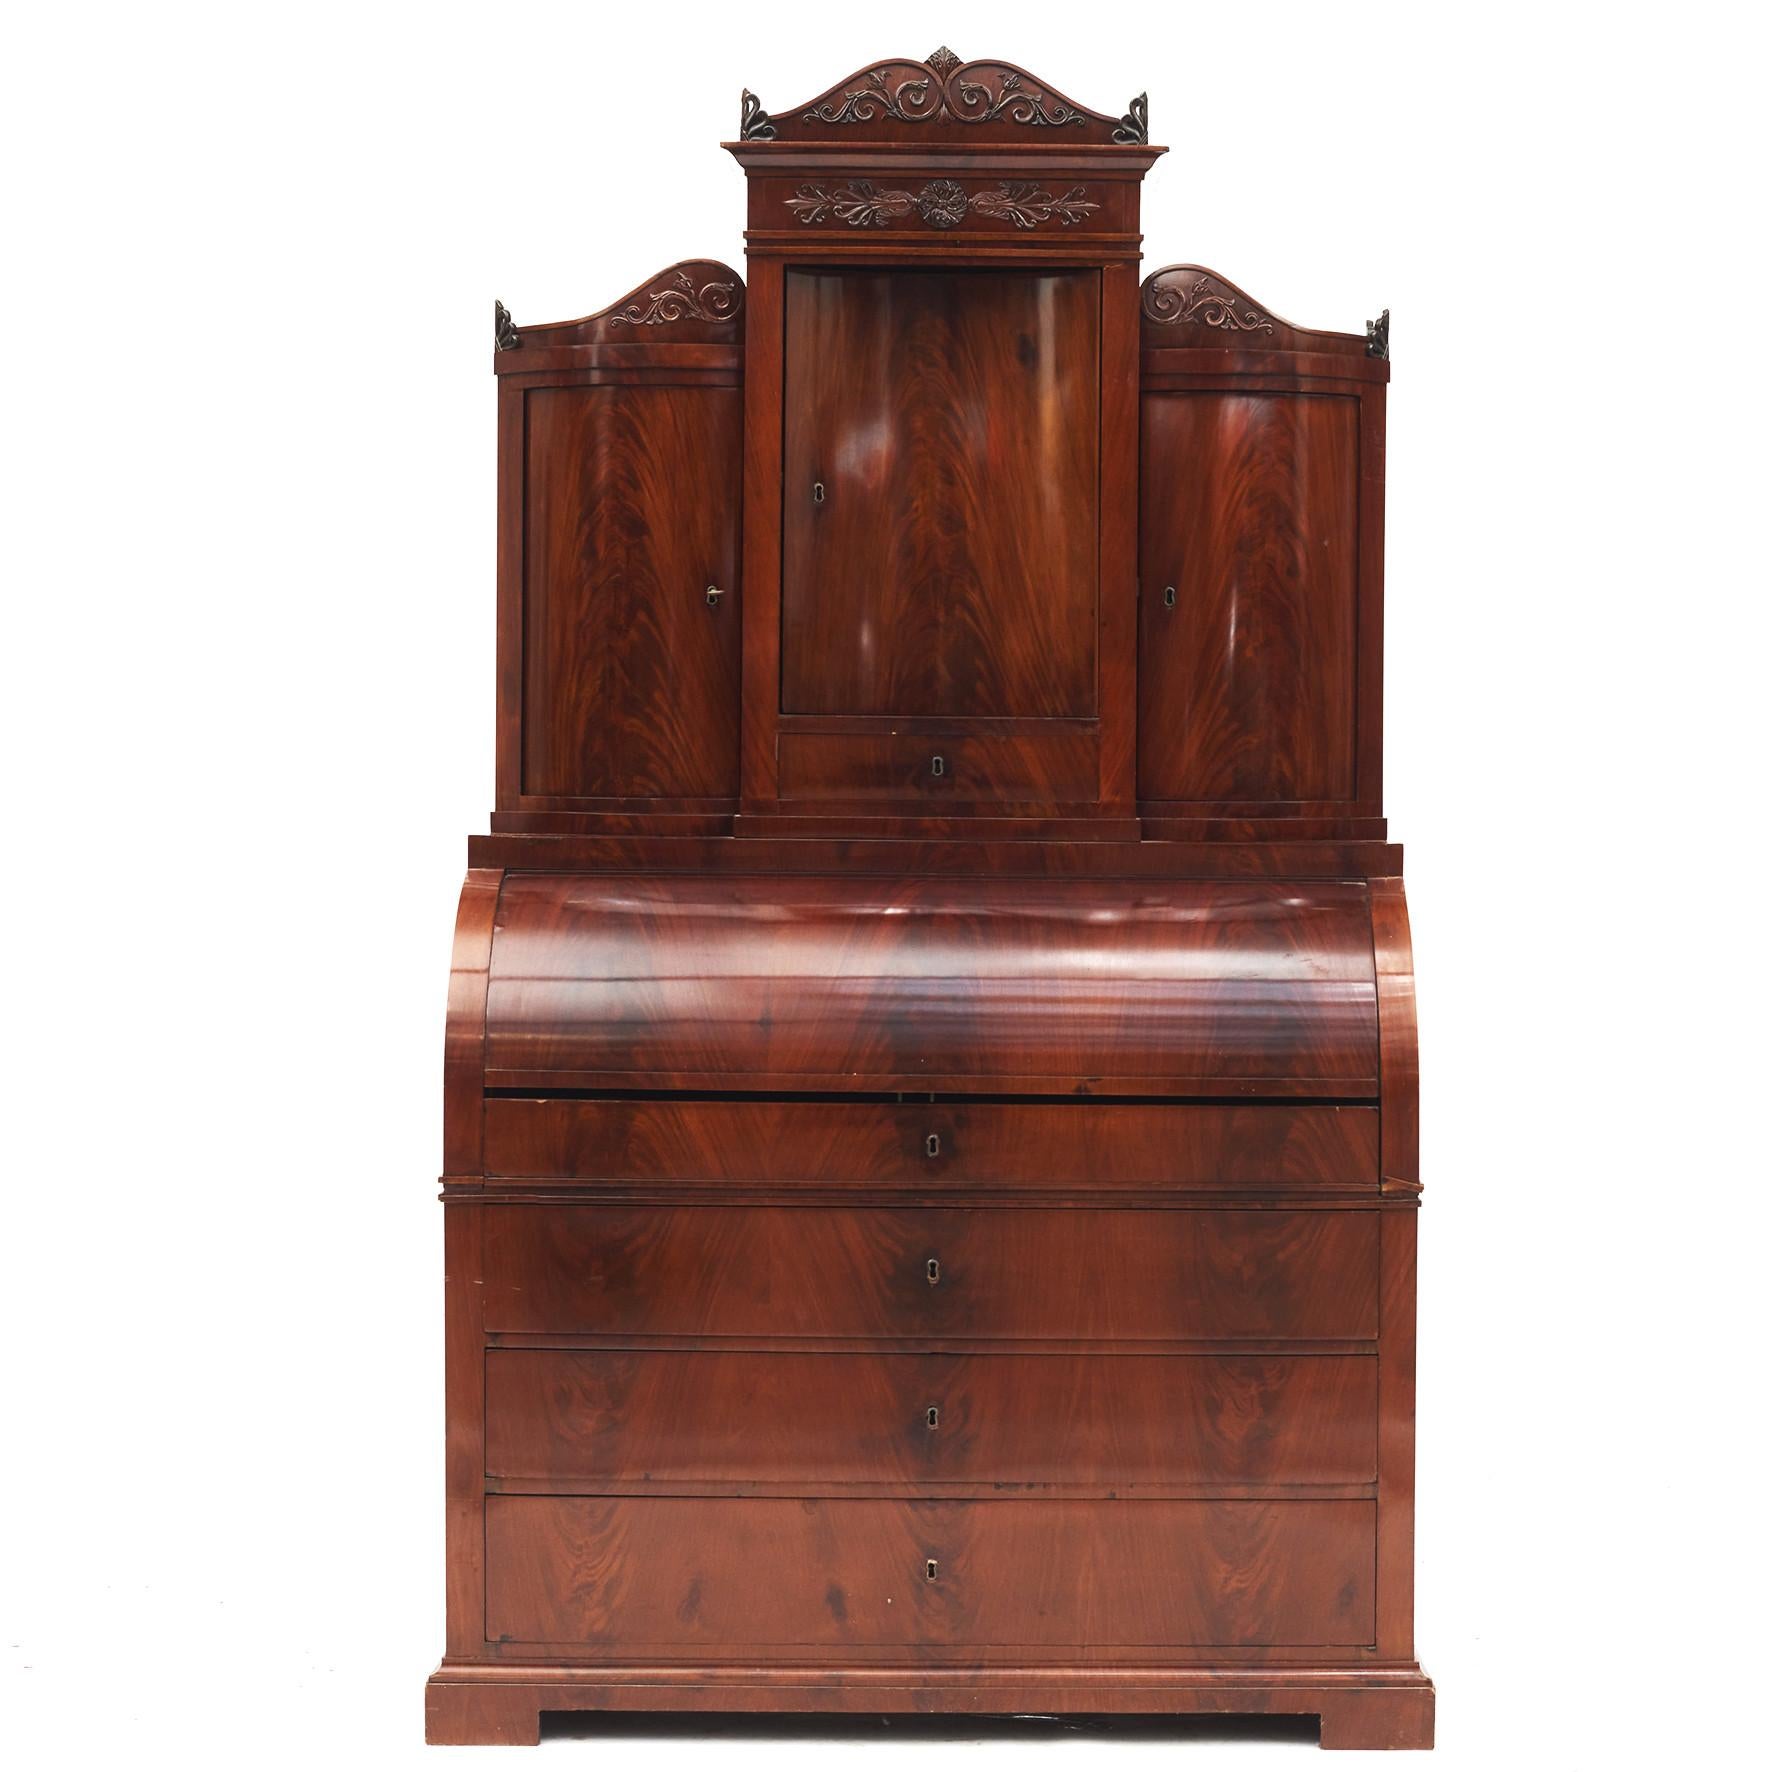 Late empire secretary bureau in mahogany veneered oak with beautiful grain.
In 2 parts.
Desk top offers three bowed doors. A concave door in the middle flanked by pair of convex doors.
Lower section with a slant front that opens to a fitted